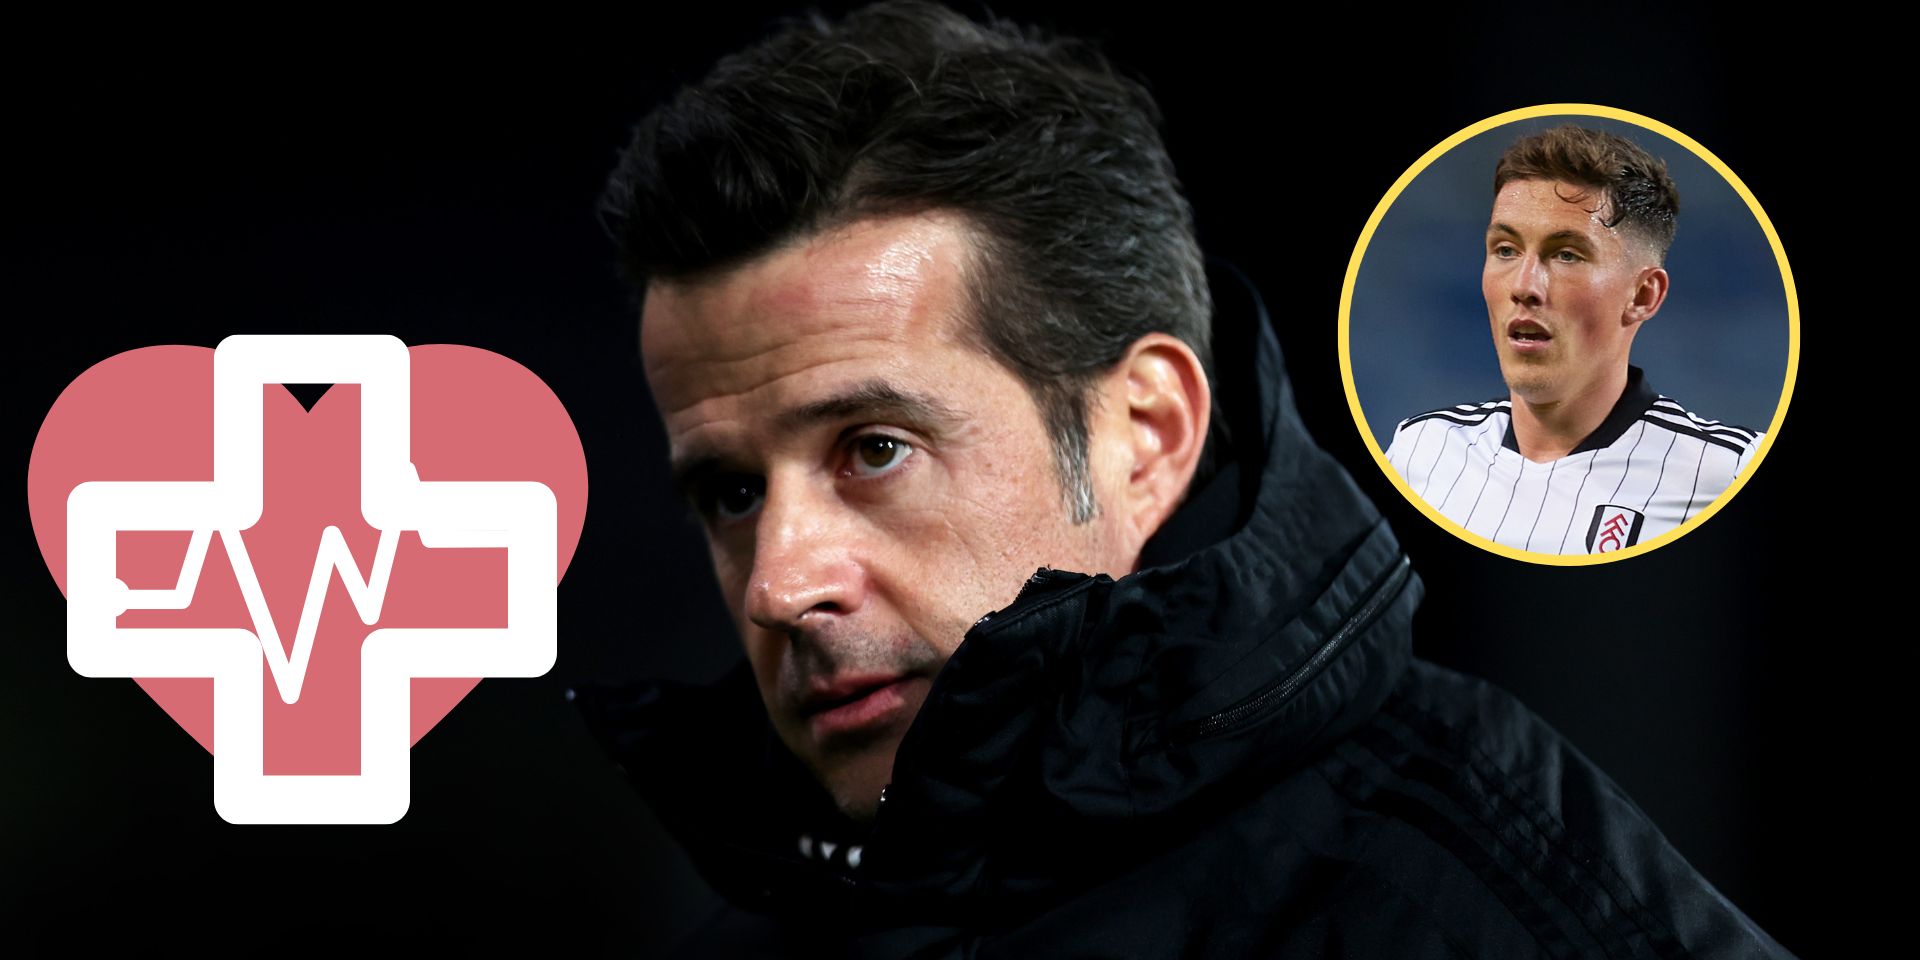 ‘It doesn’t look good’ – Marco Silva worried by Fulham injuries ahead of Liverpool visit